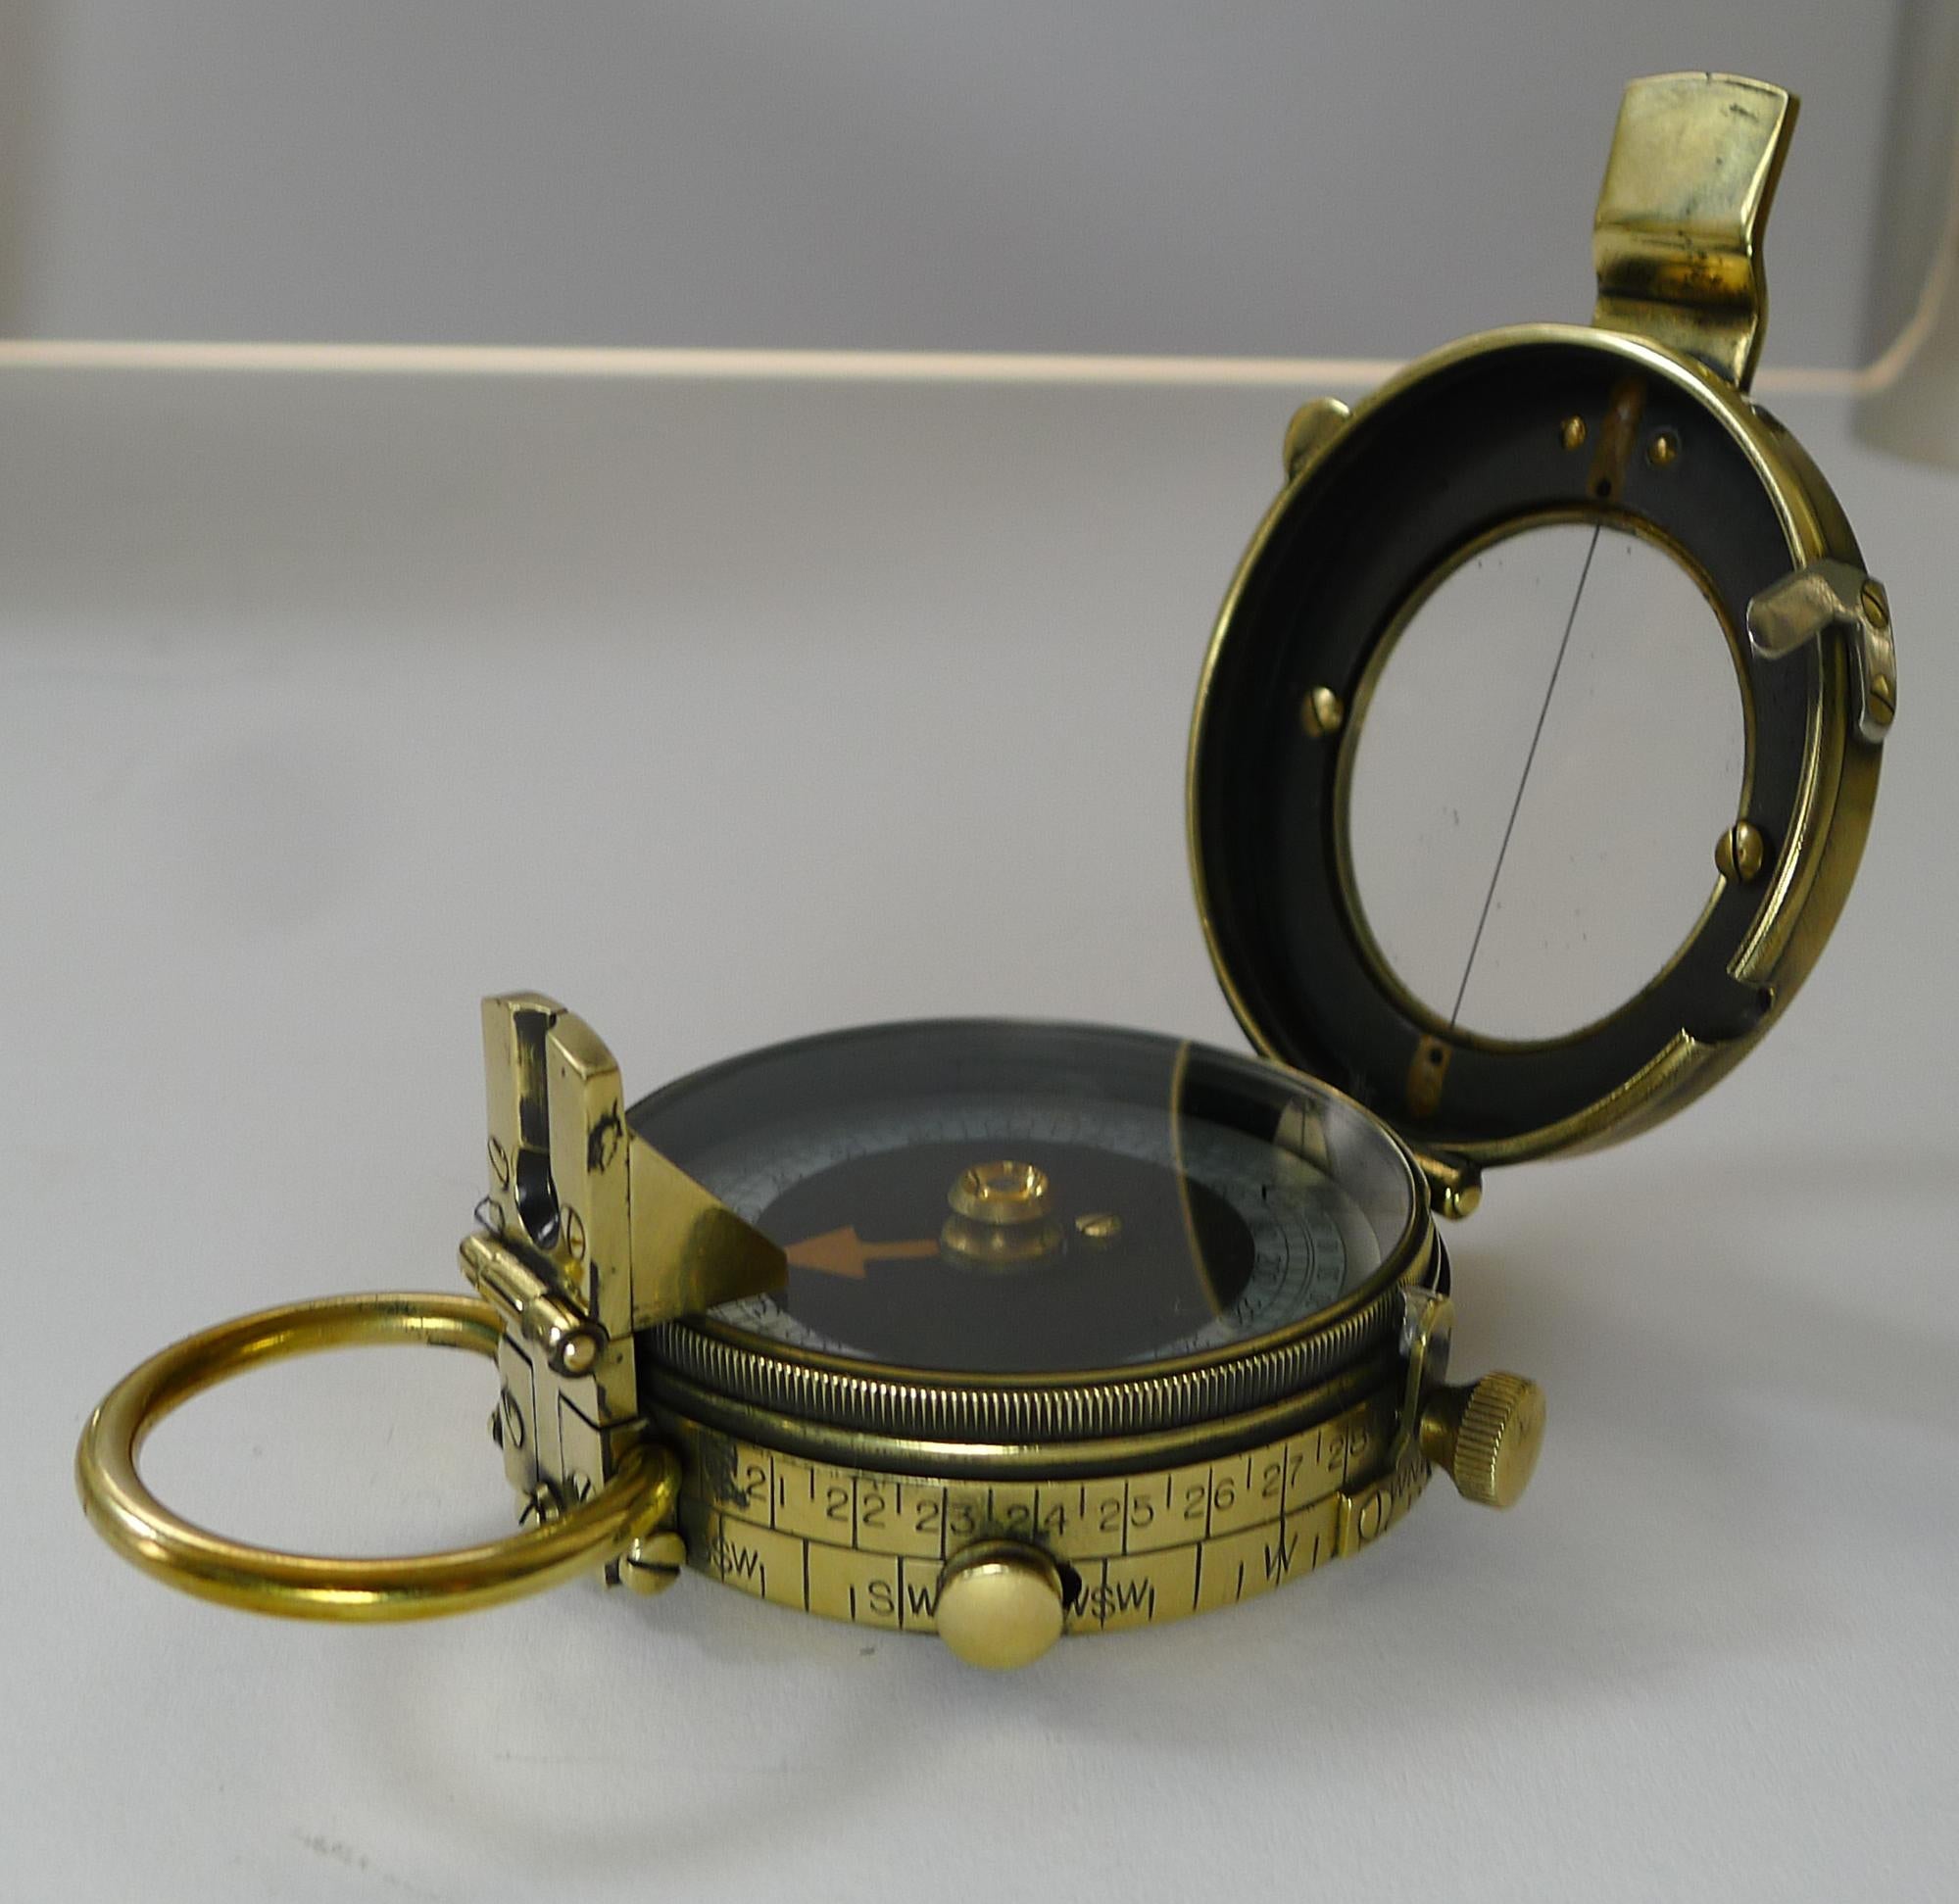 Brass WWI 1917 British Army Officer's Compass, Verner's Patent Mk viii by French Ltd